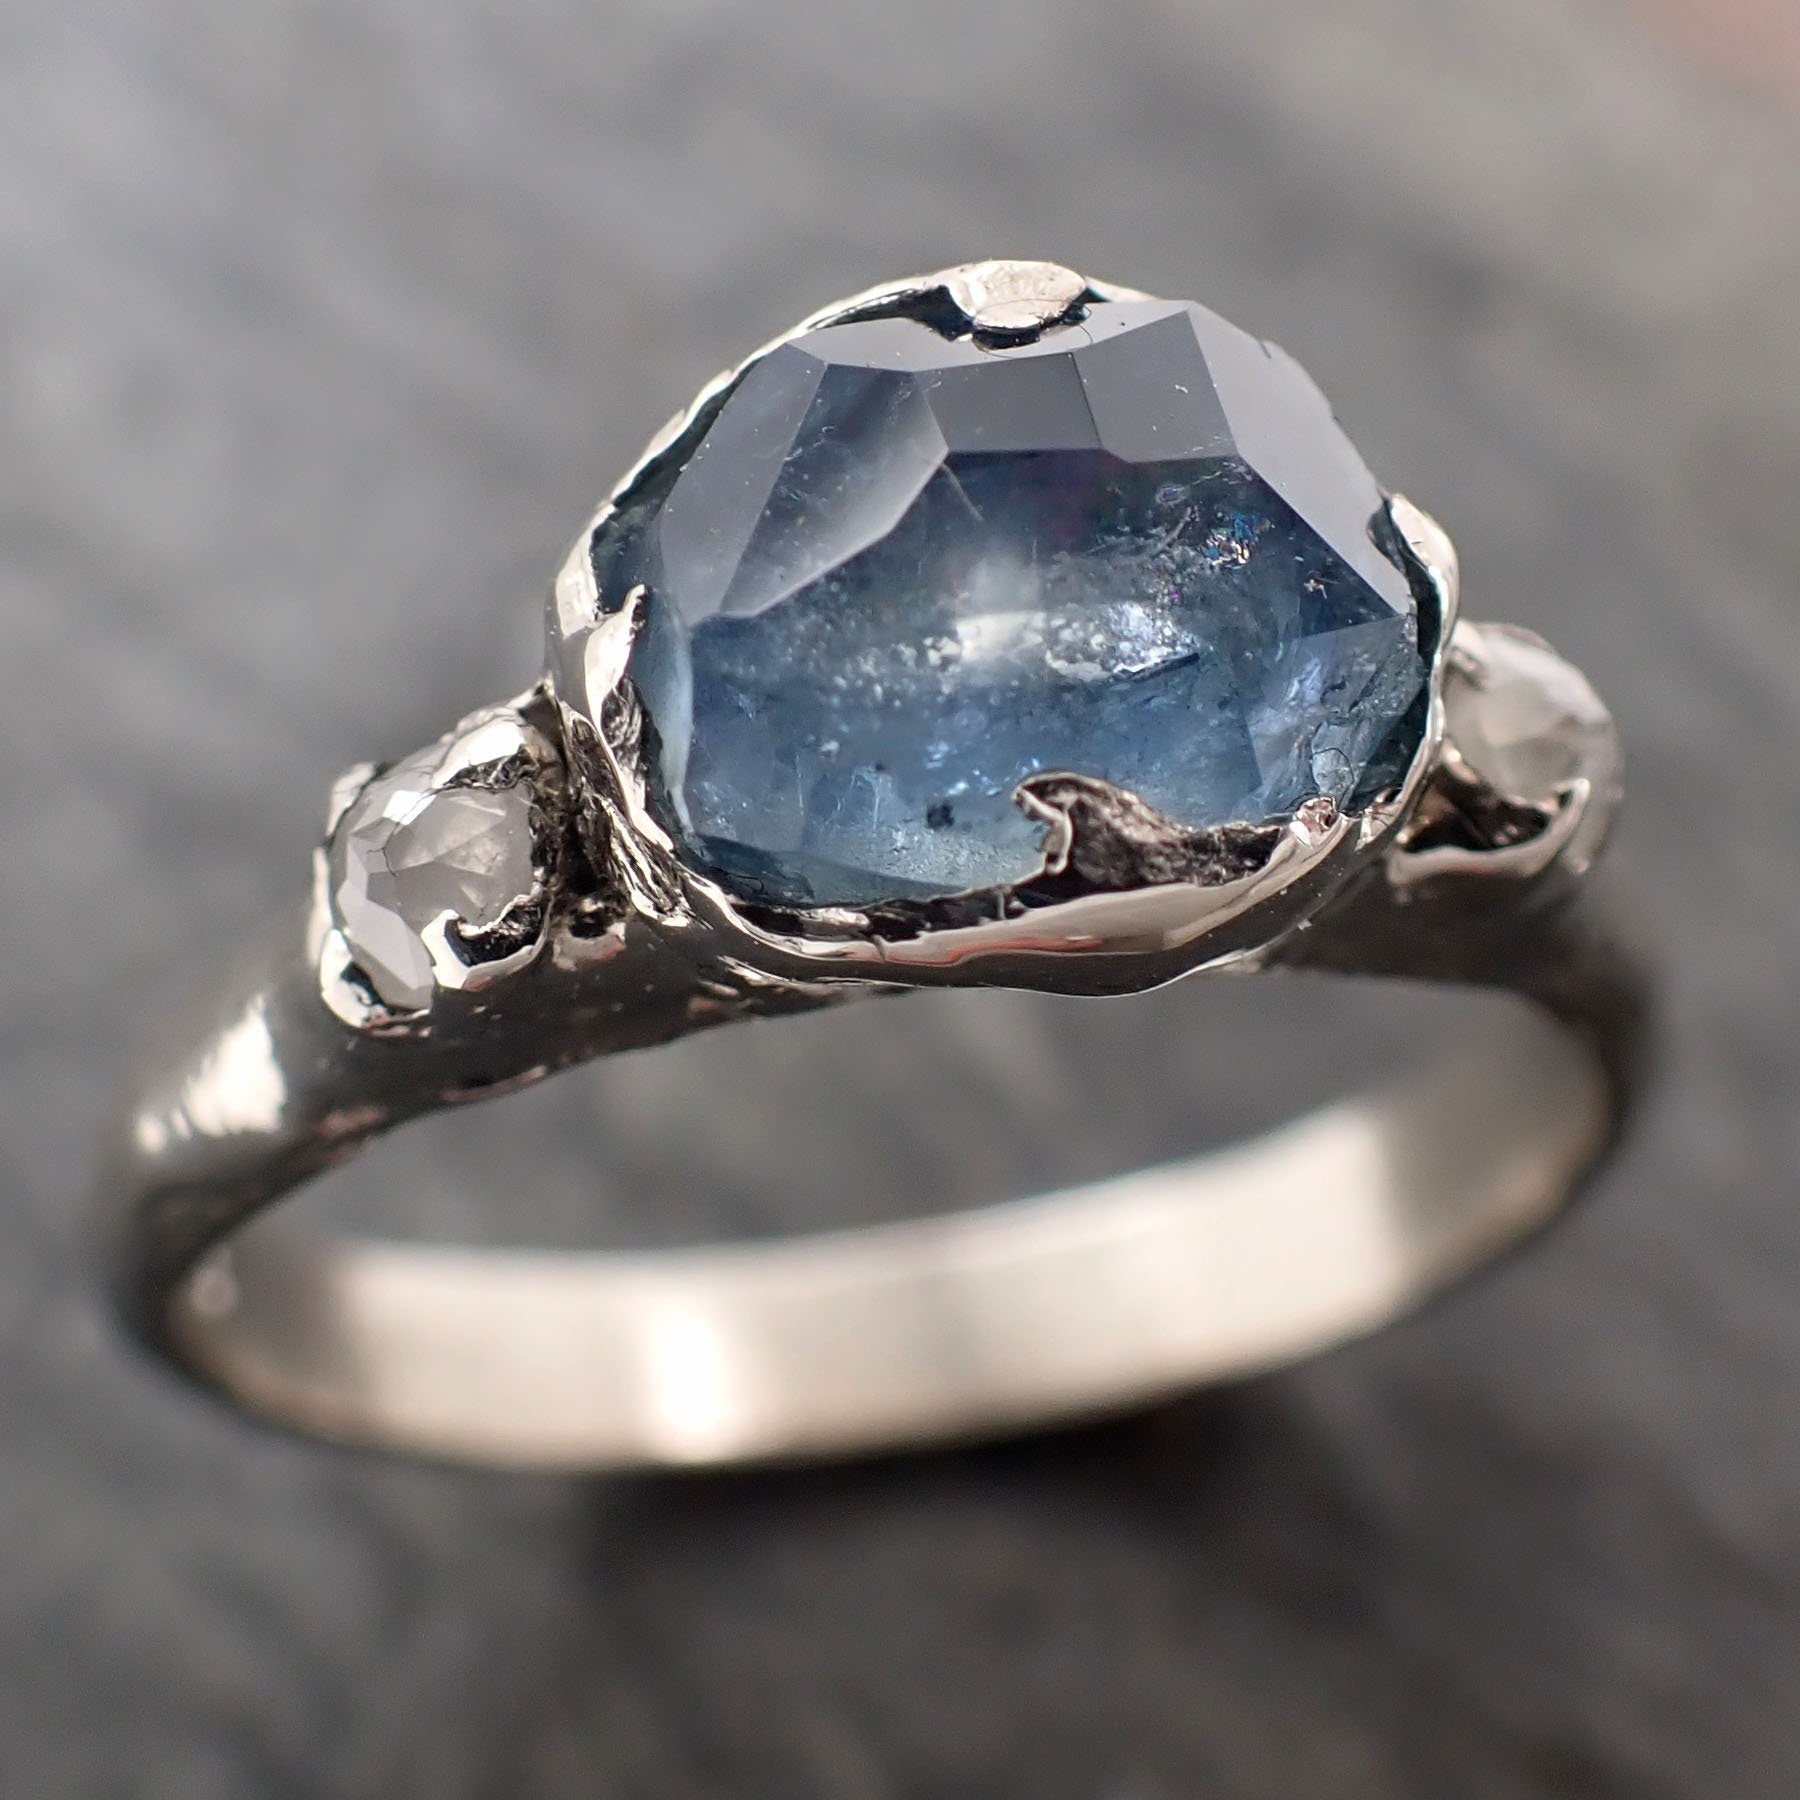 Partially faceted blue Montana Sapphire and fancy Diamonds 14k White Gold Engagement Wedding Ring Custom Gemstone Ring Multi stone Ring 2926